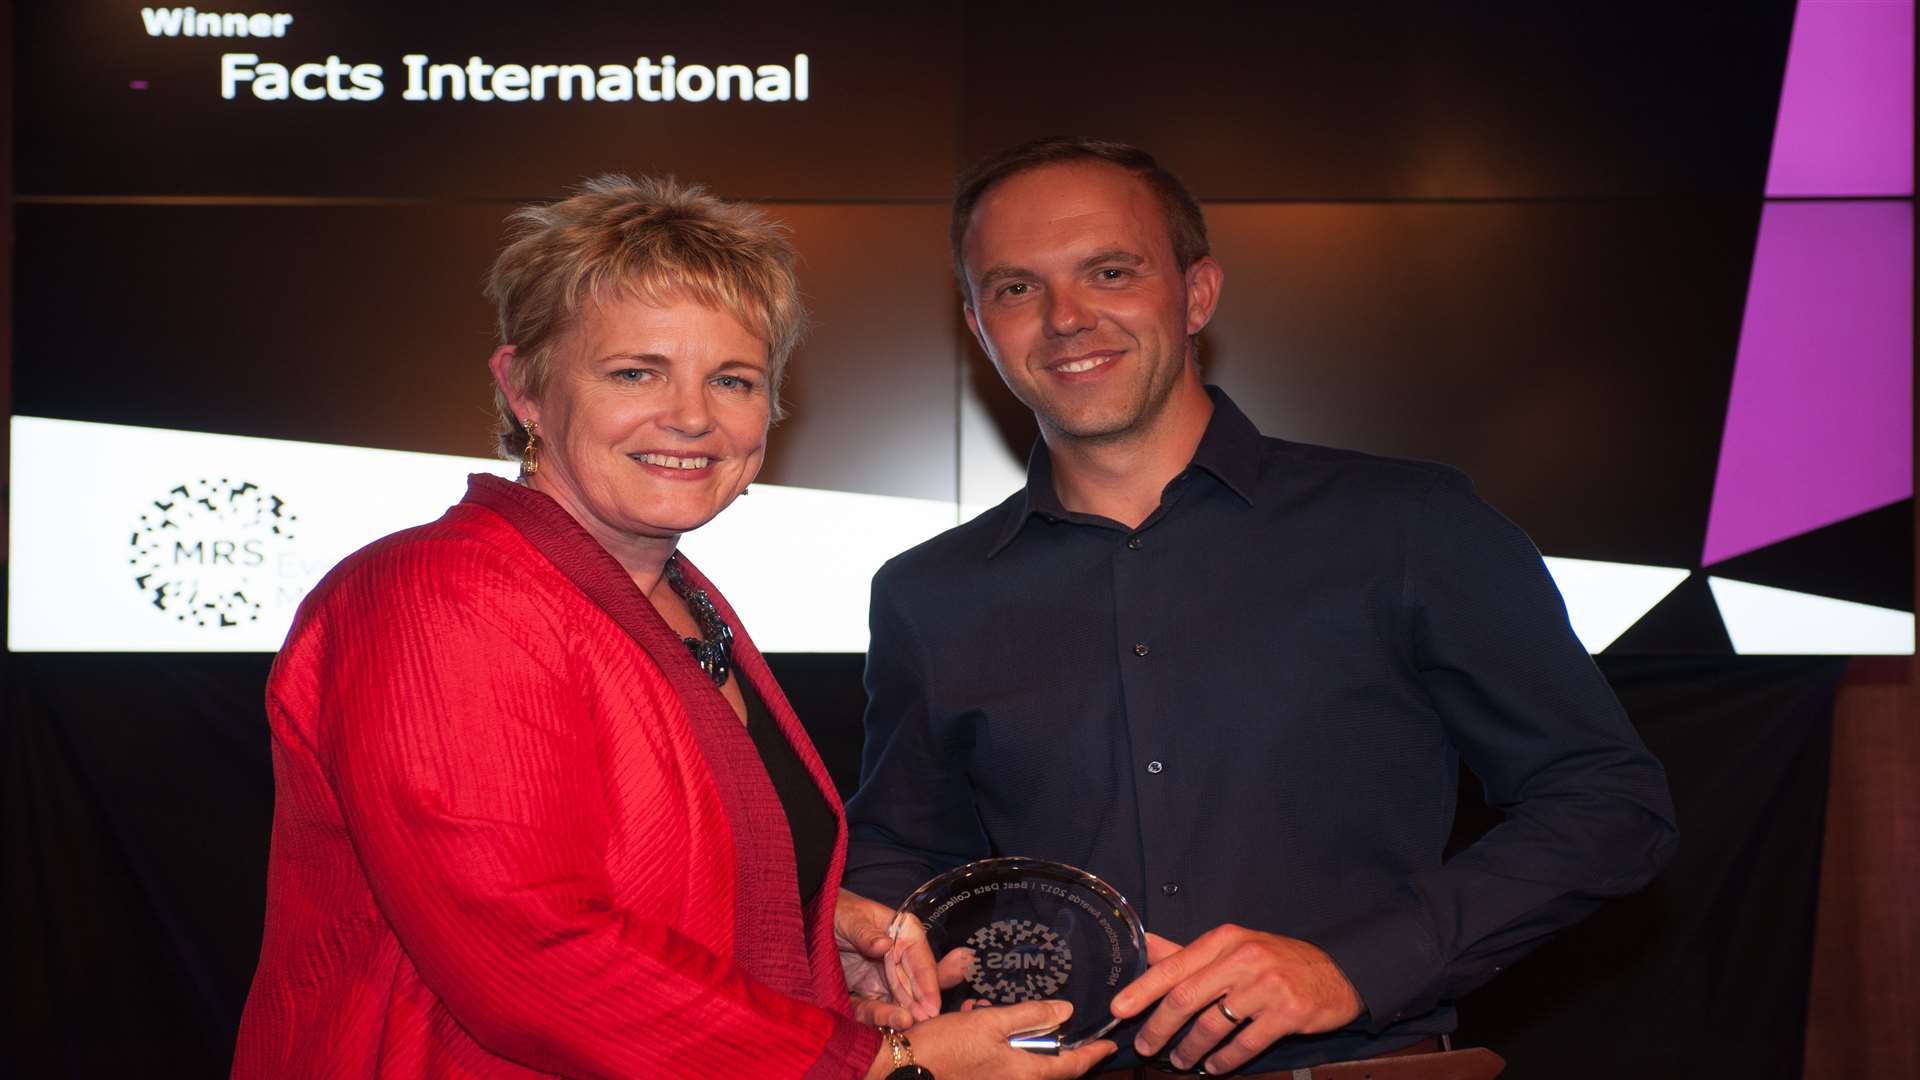 Market Research Society chief executive Jane Frost presents the award to Facts International's field director Adam Wyles